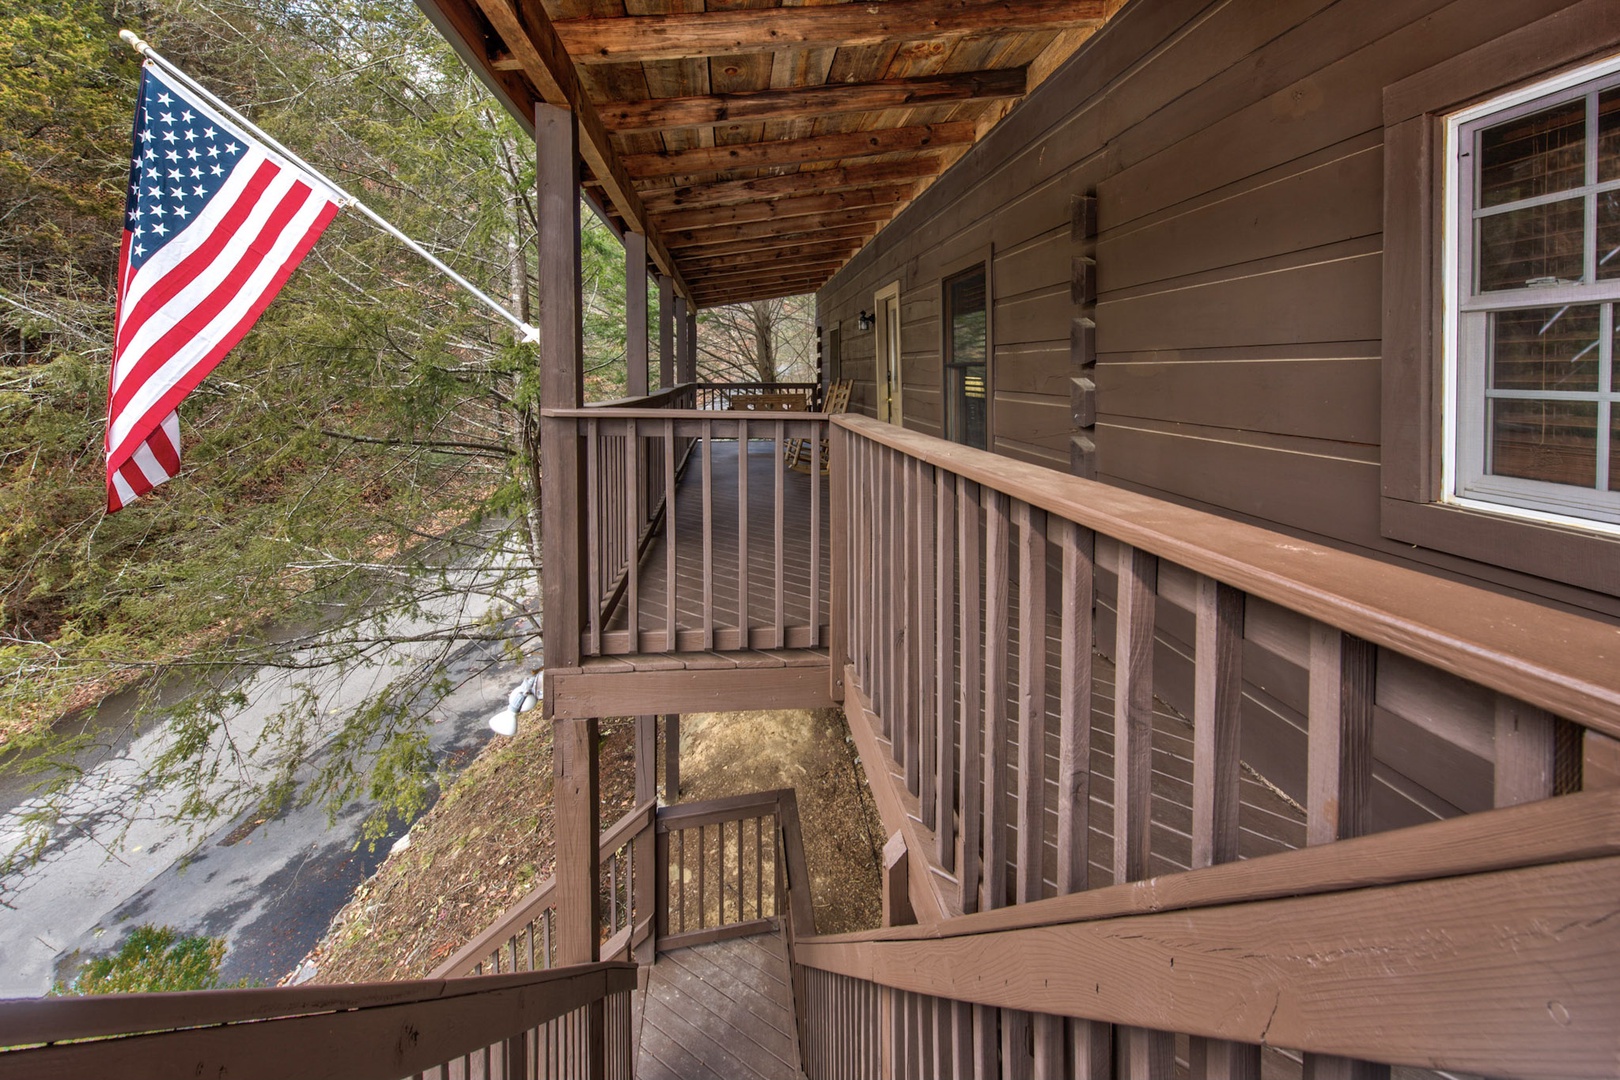 Ascend to the elevated deck and soak in serene nature views before entering